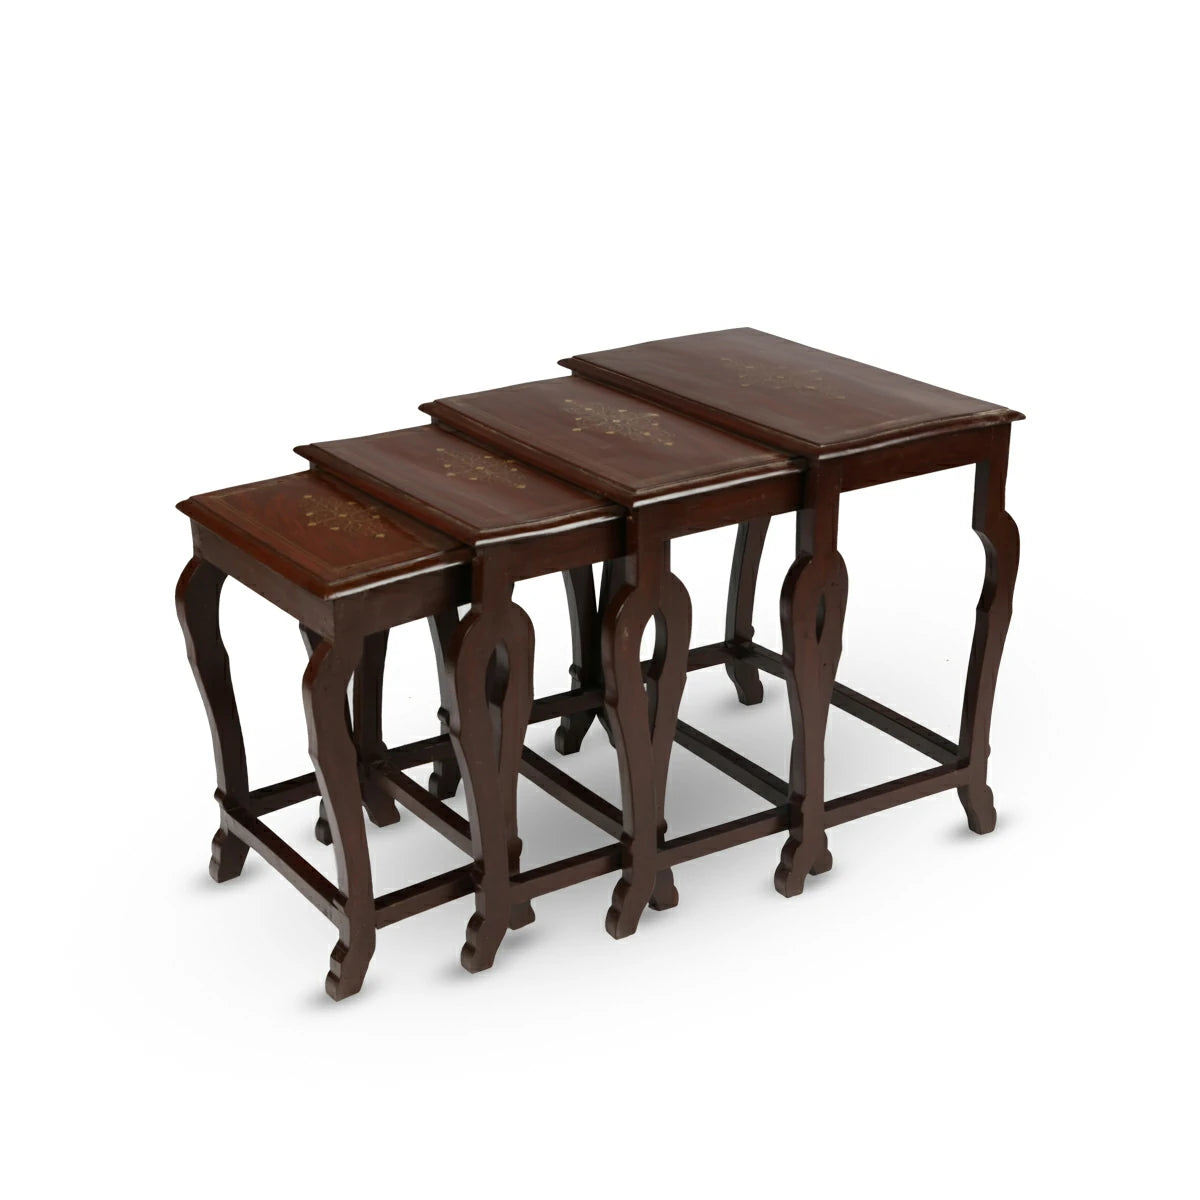 Hand-crafted Brass Inlaid Walnut Wood Nested Tables